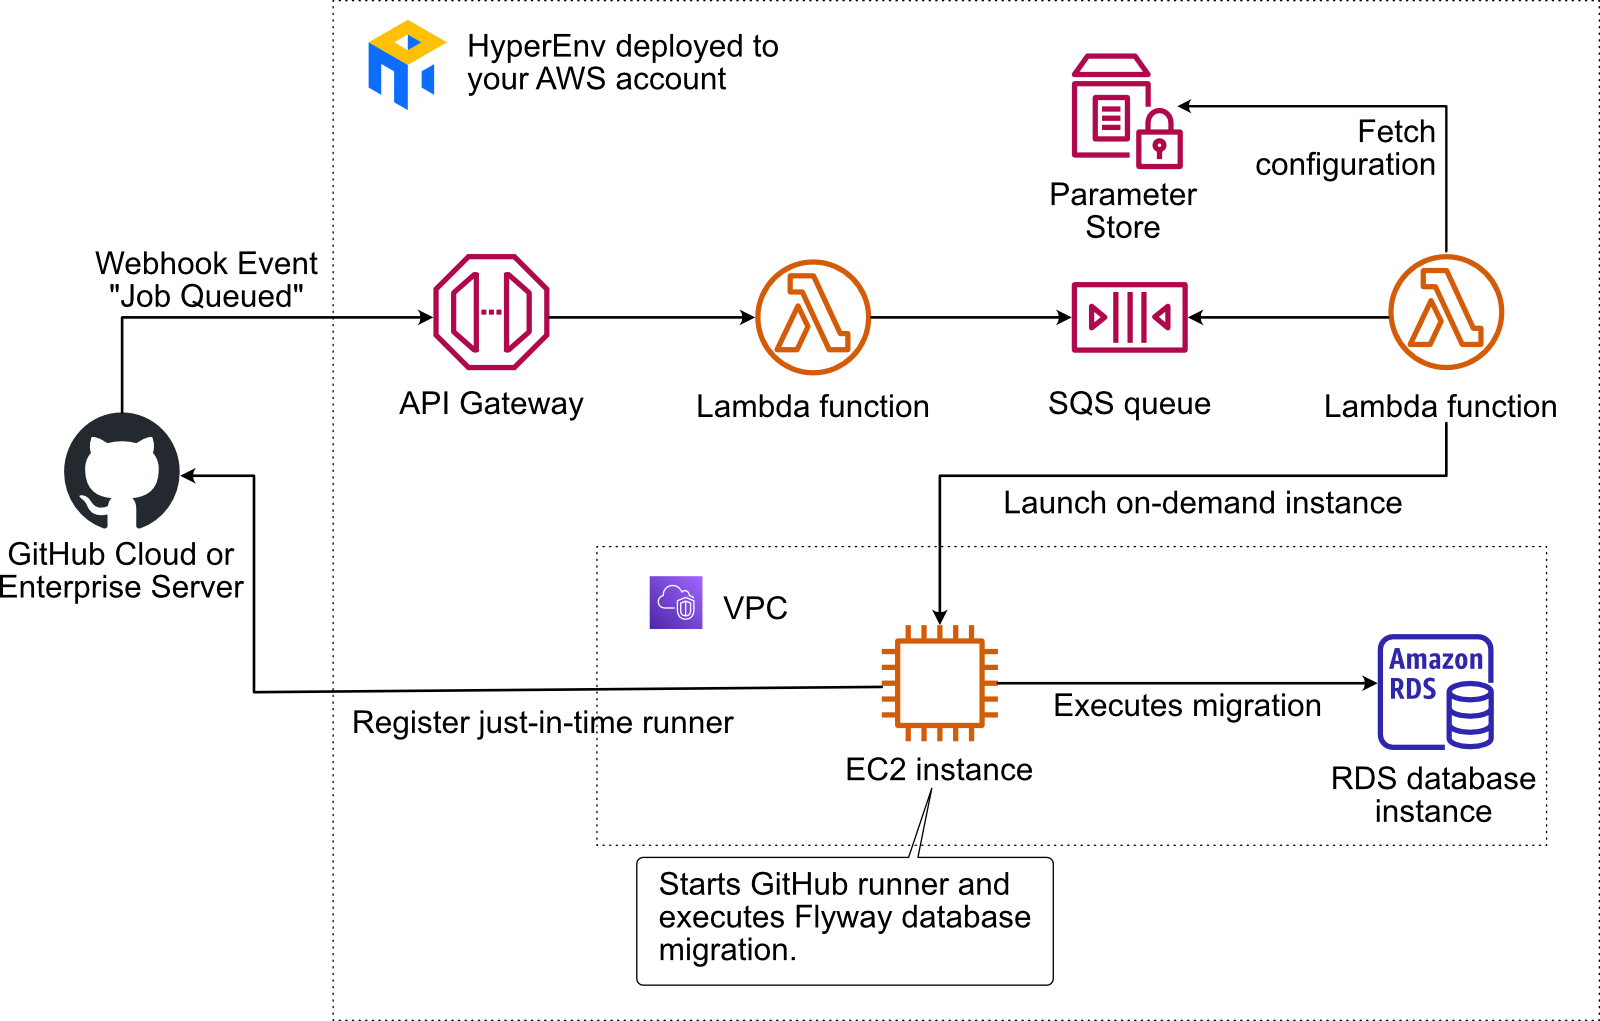 HyperEnv launches EC2 instances acting as self-hosted runners on-demand